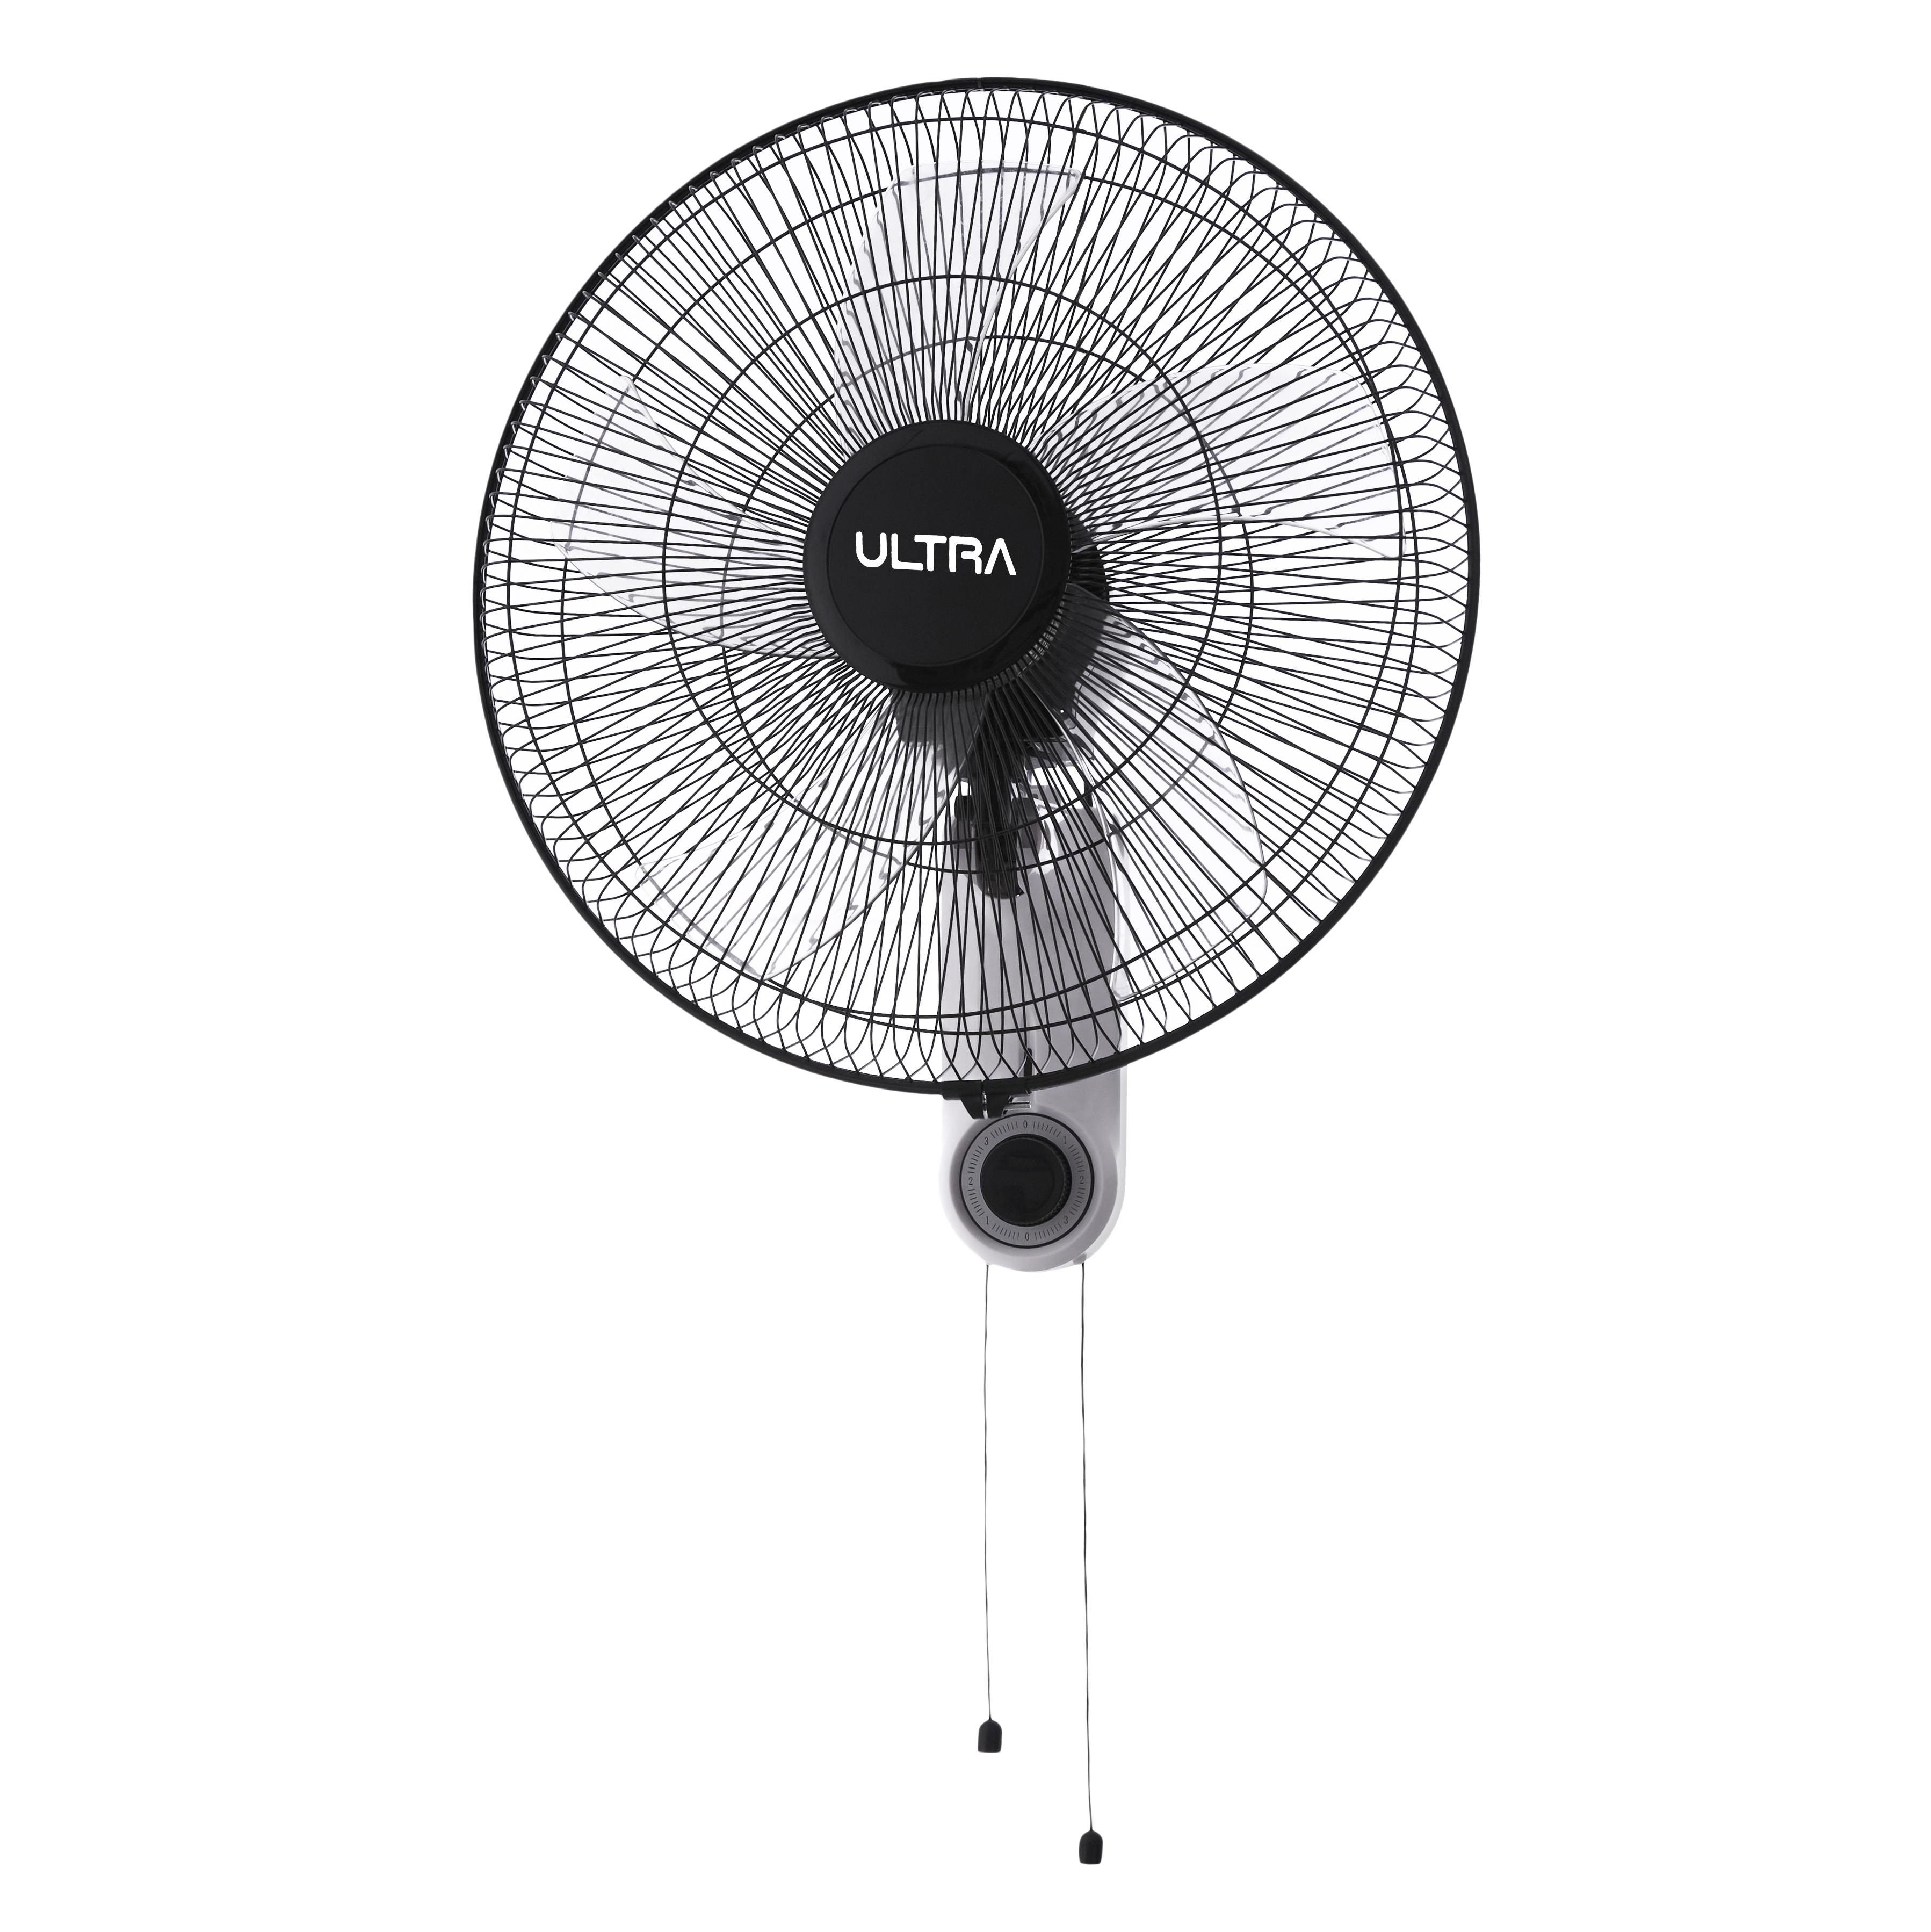 Ultra Wall Mount Fan, 18 Inch, Black and White - UFW18E1